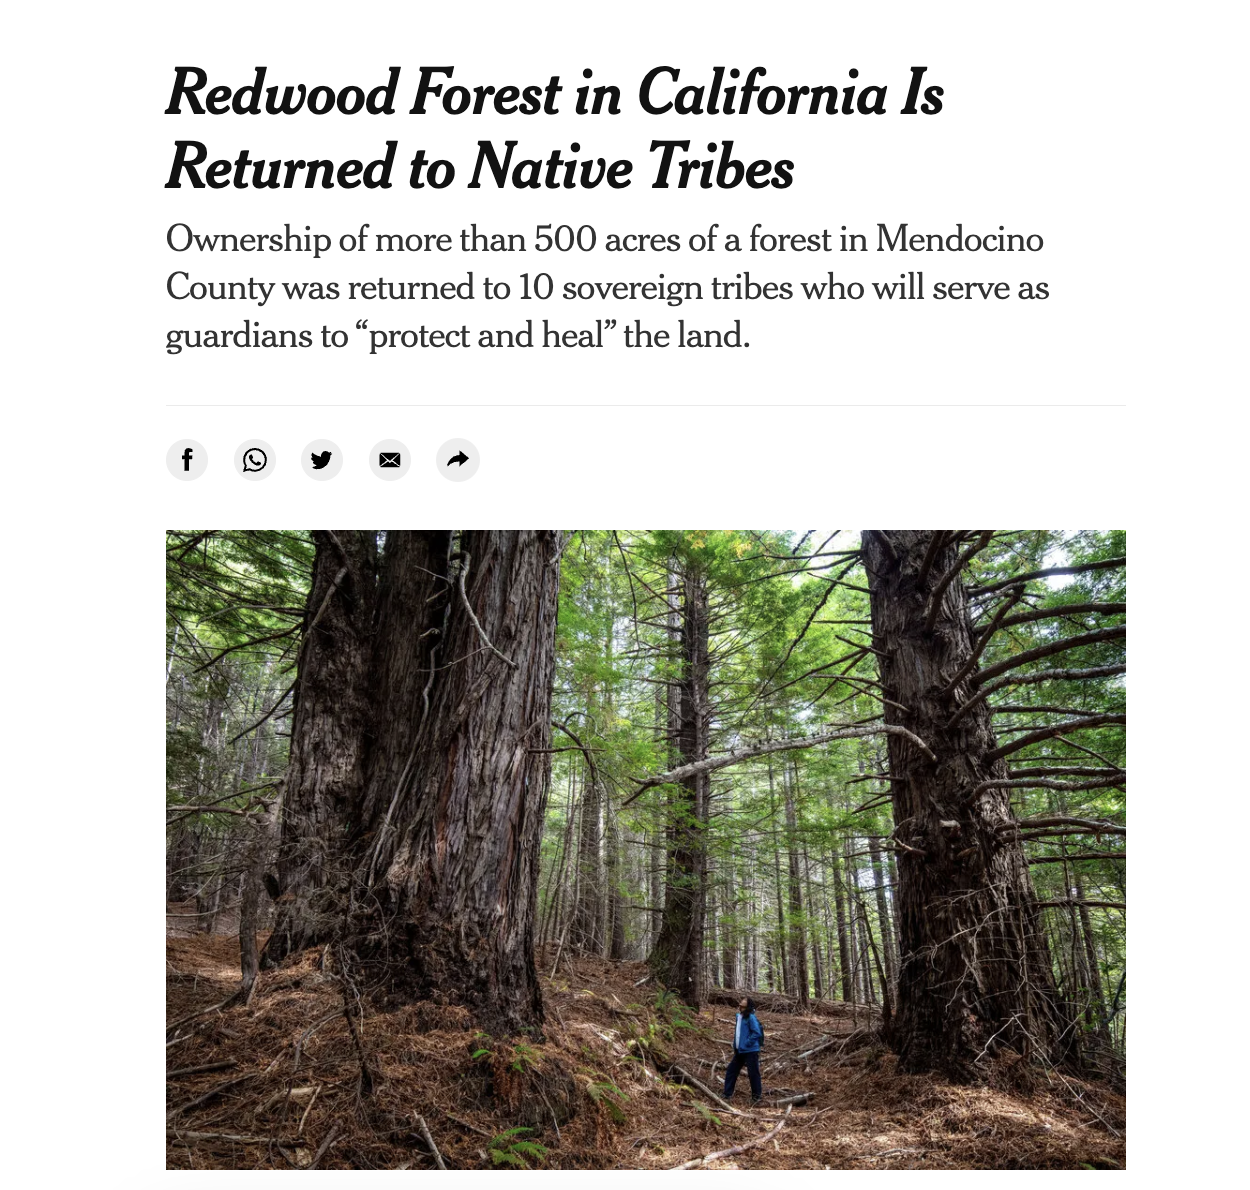 NYT: Redwood Forest in California Is Returned to Native Tribes Ownership of more than 500 acres of a forest in Mendocino County was returned to 10 sovereign tribes who will serve as guardians to “protect and heal” the land.